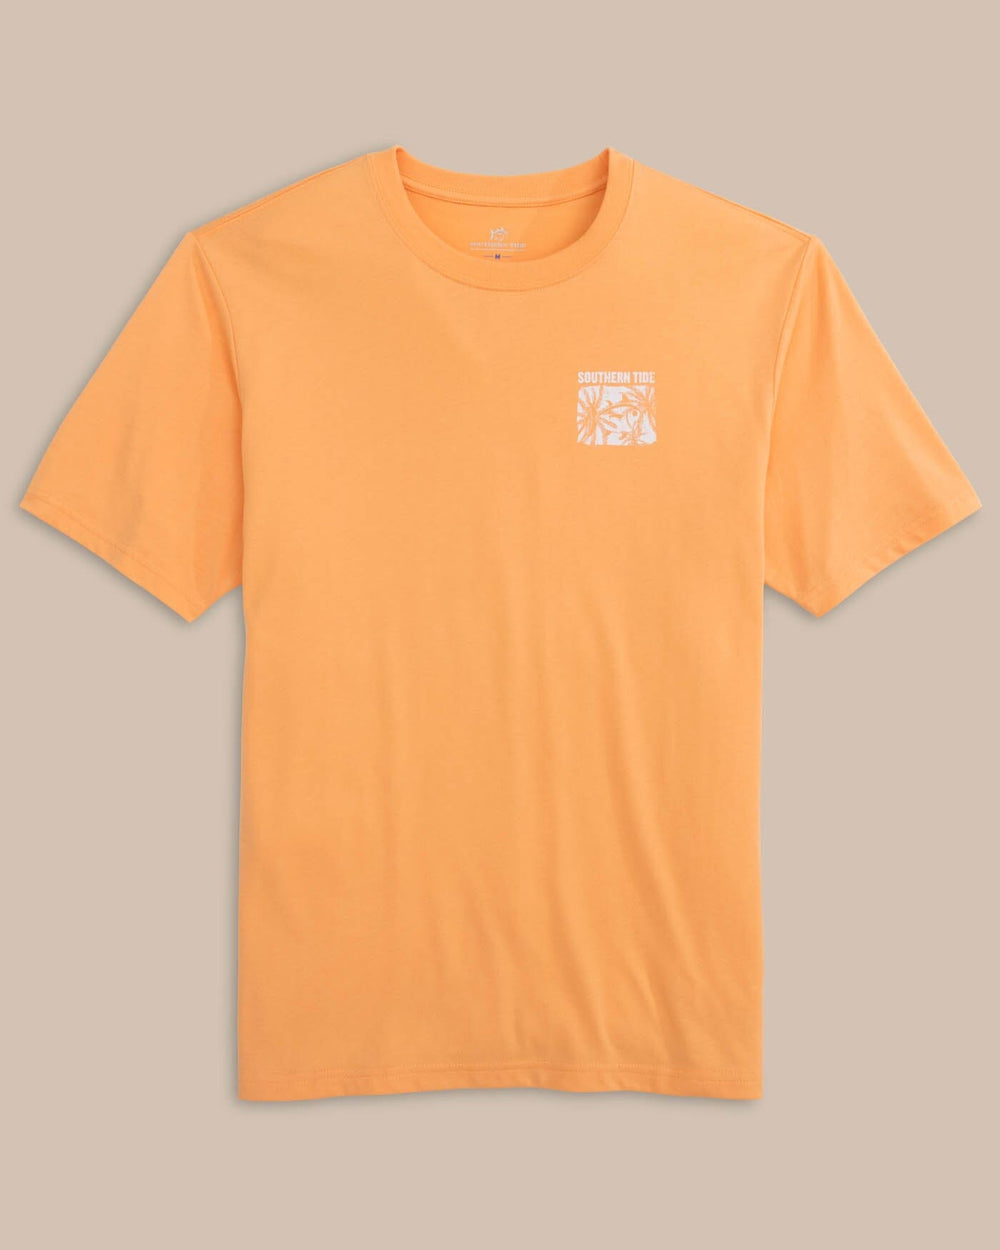 The front view of the Southern Tide Palm and Breezy Short Sleeve T-shirt by Southern Tide - Salmon Bluff Orange